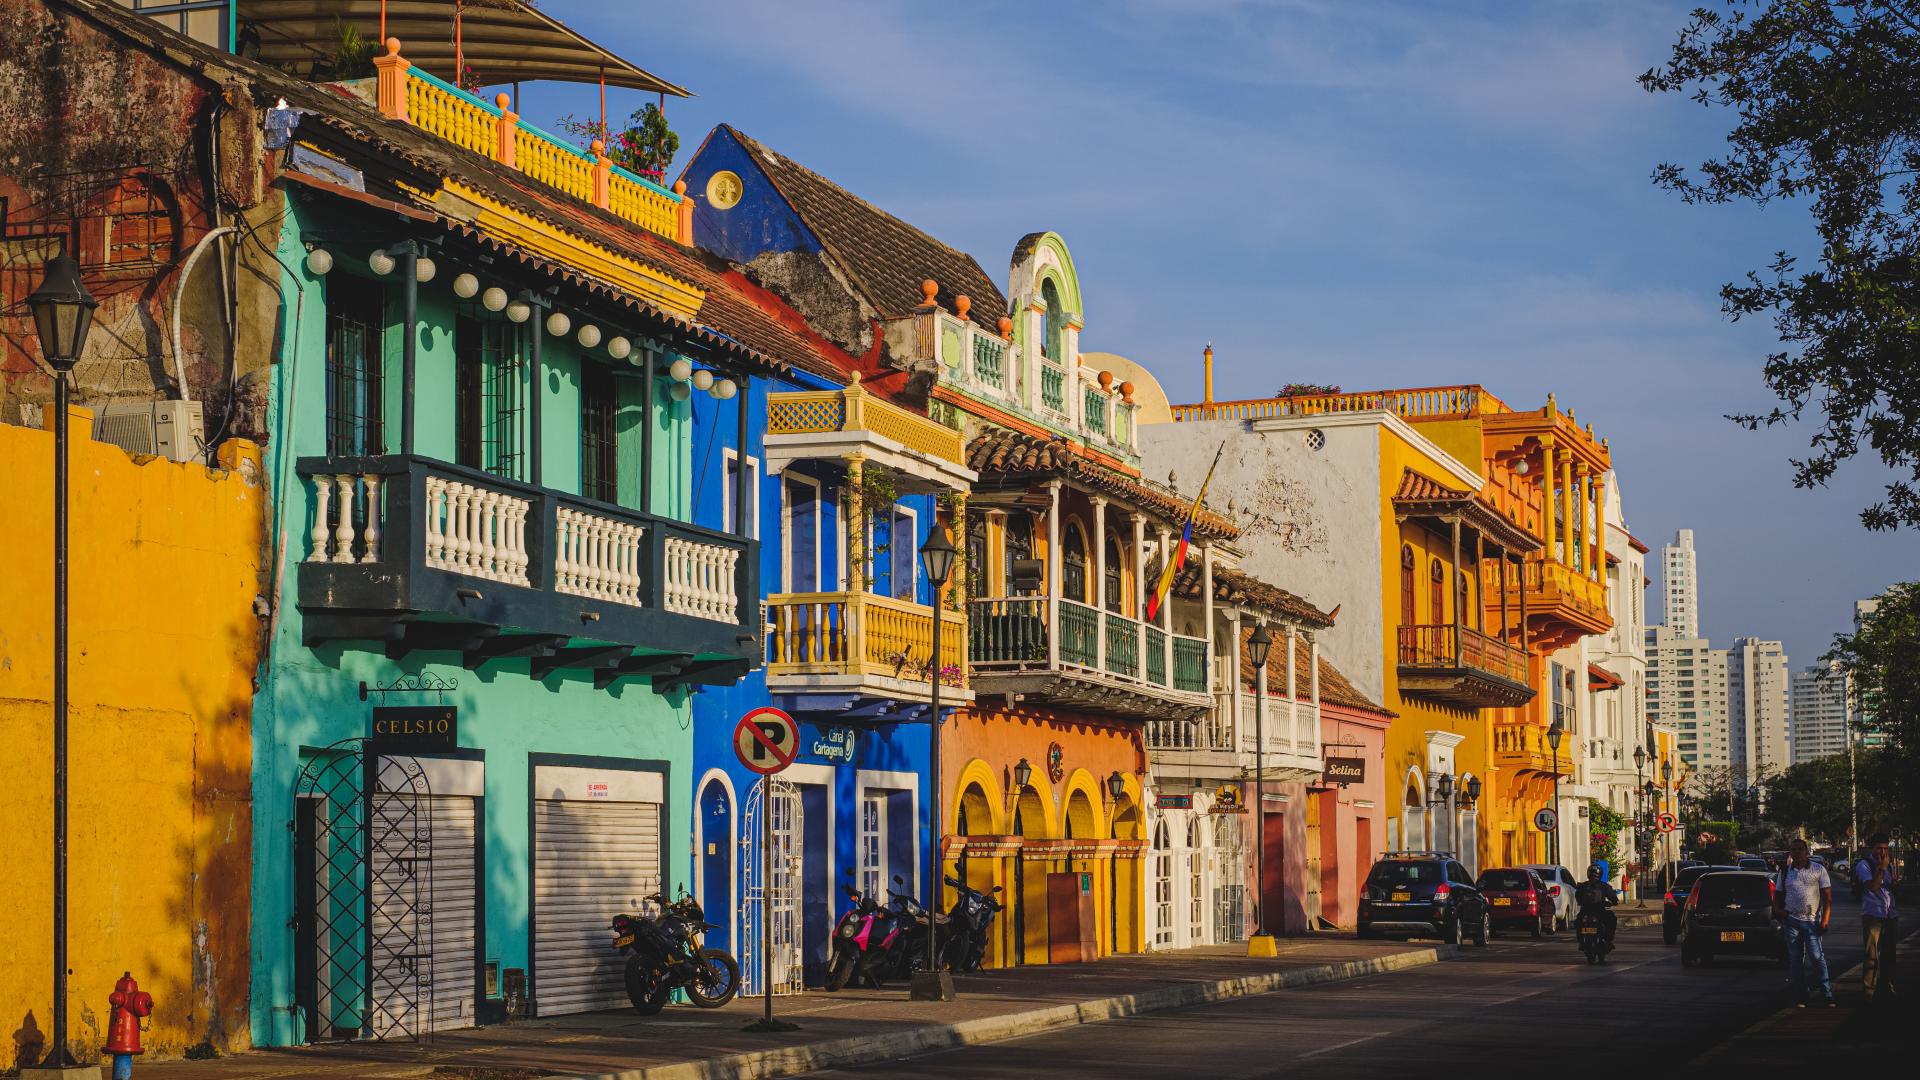 Colourful painted buildings in a street in Cartagena